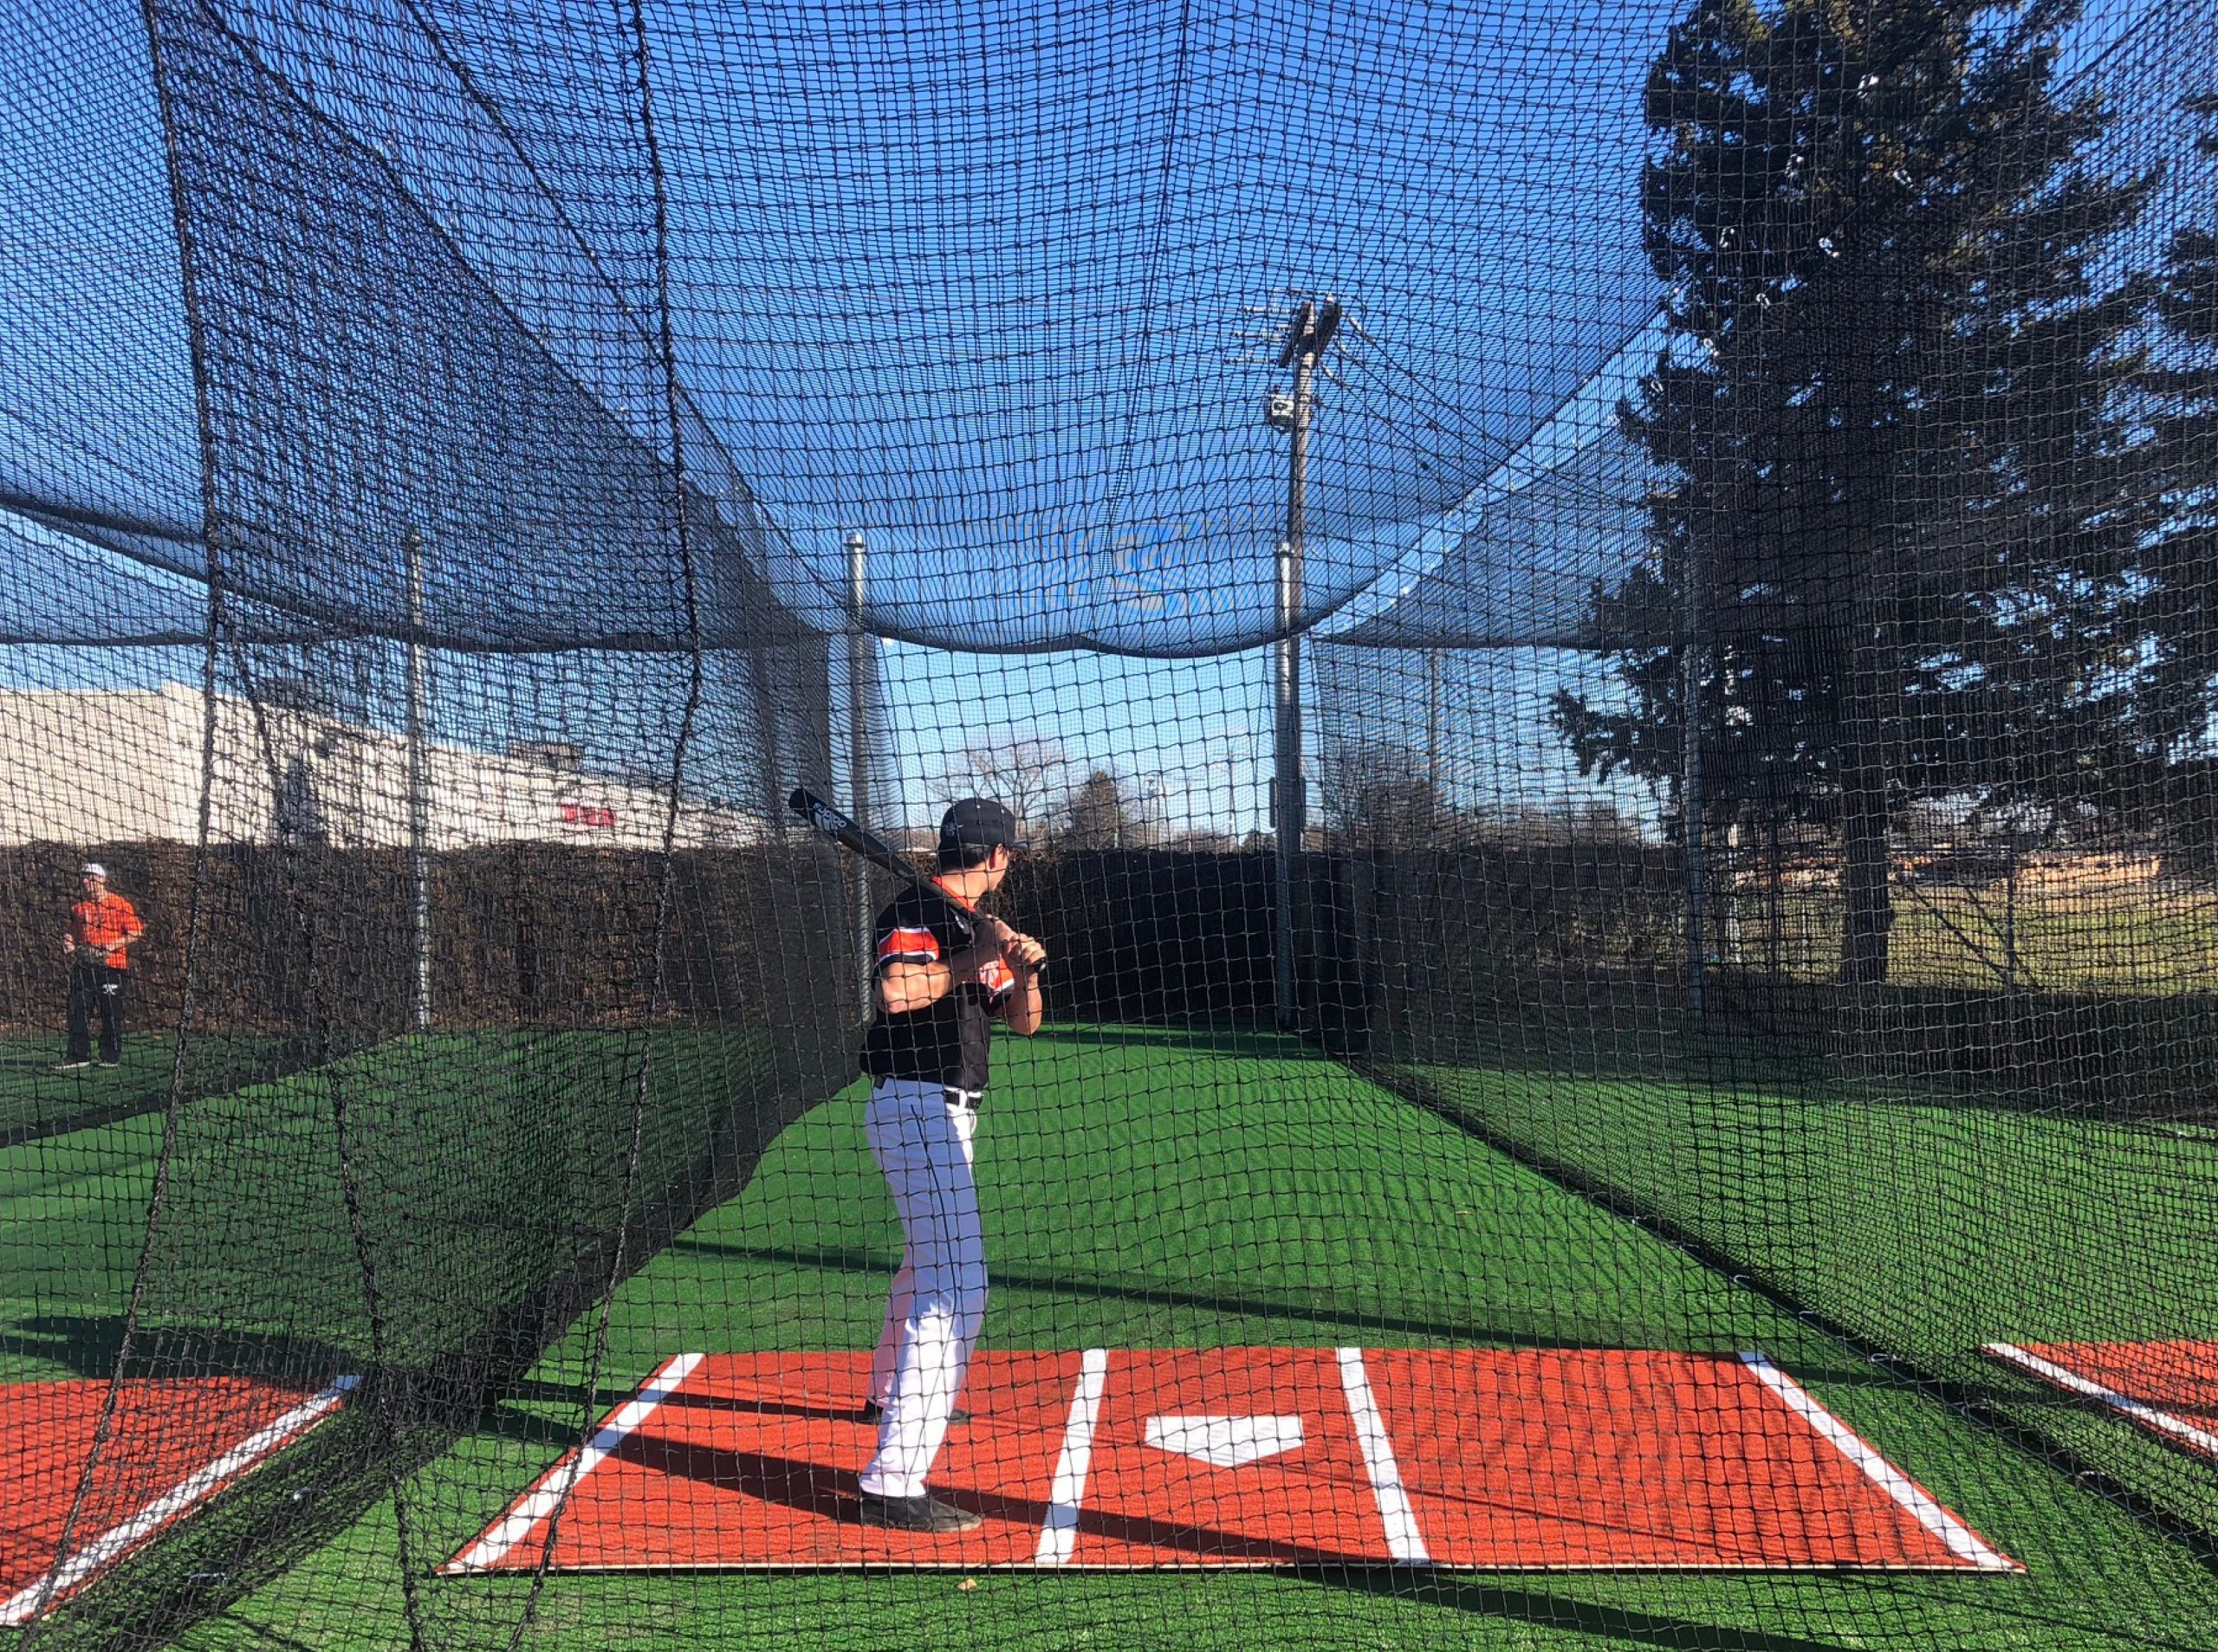 Picture of baseball player in a batting cage